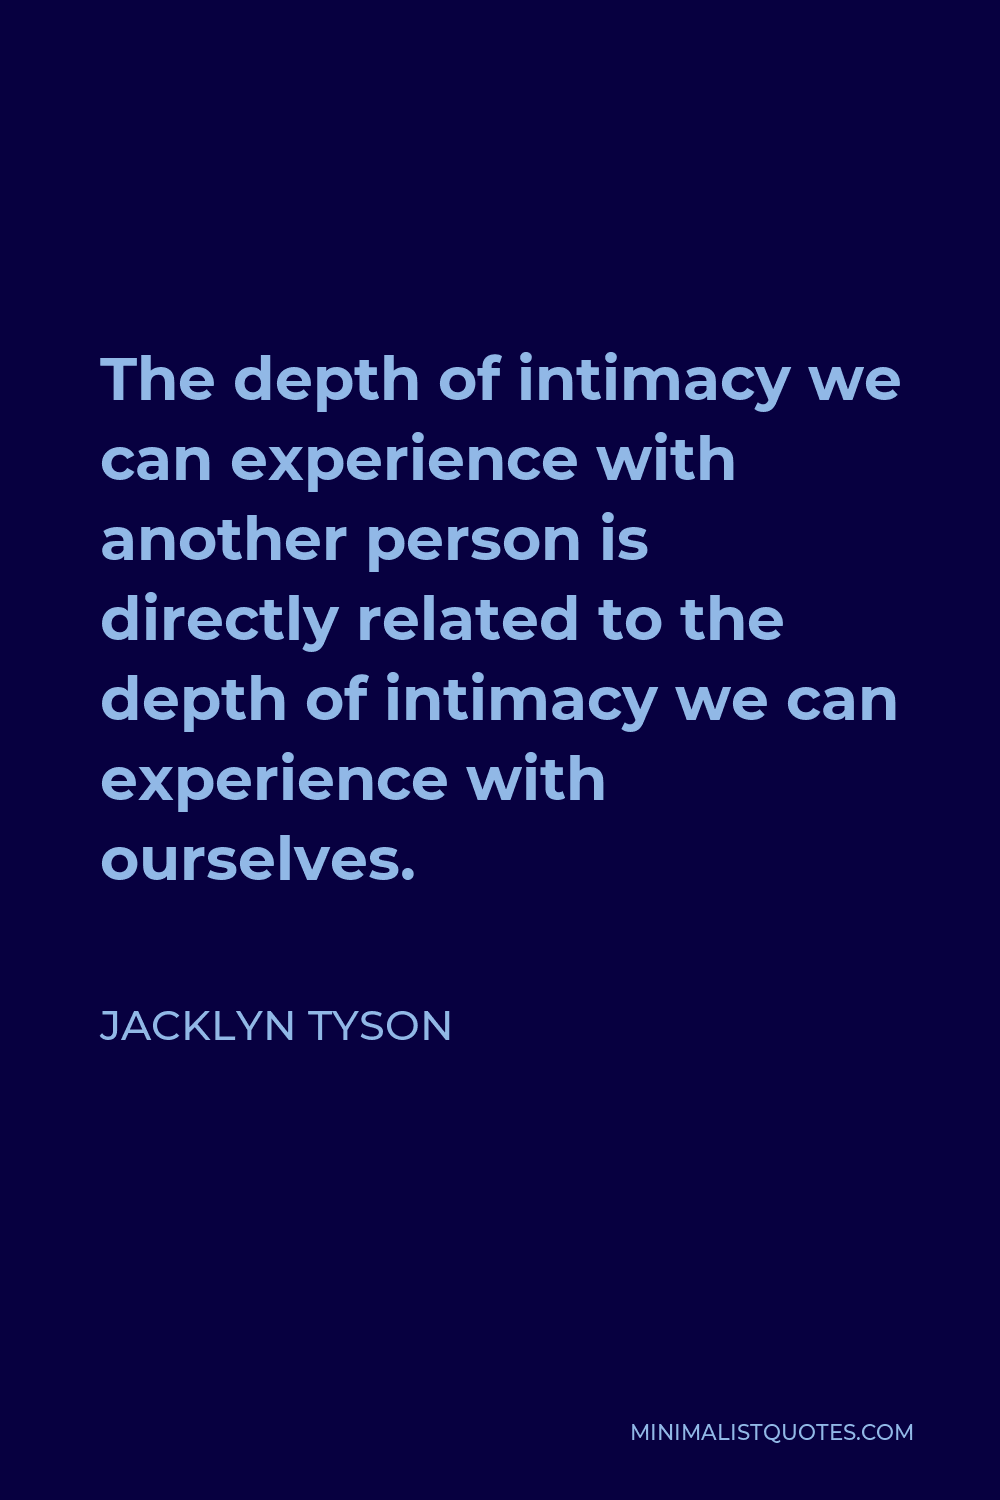 Jacklyn Tyson Quote - The depth of intimacy we can experience with another person is directly related to the depth of intimacy we can experience with ourselves.